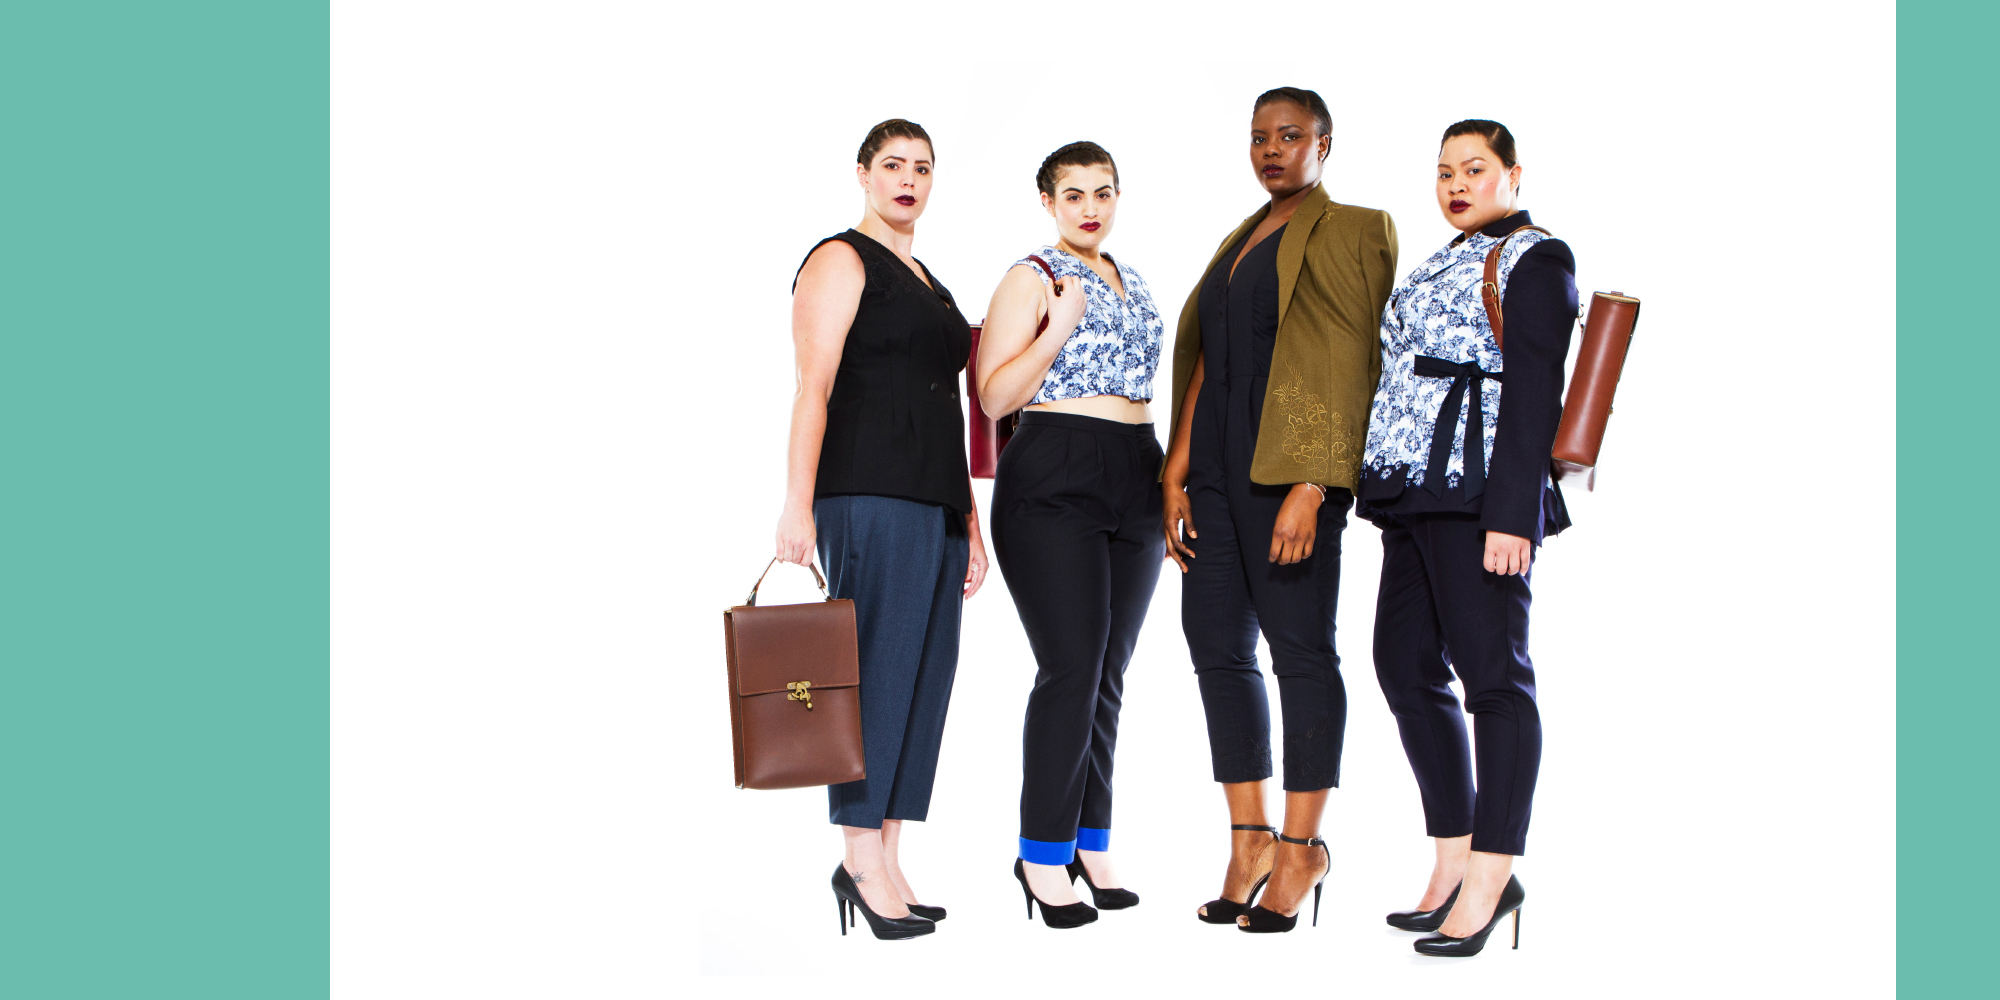 Alumna, Susan Jean who started designing clothing for plus-size women